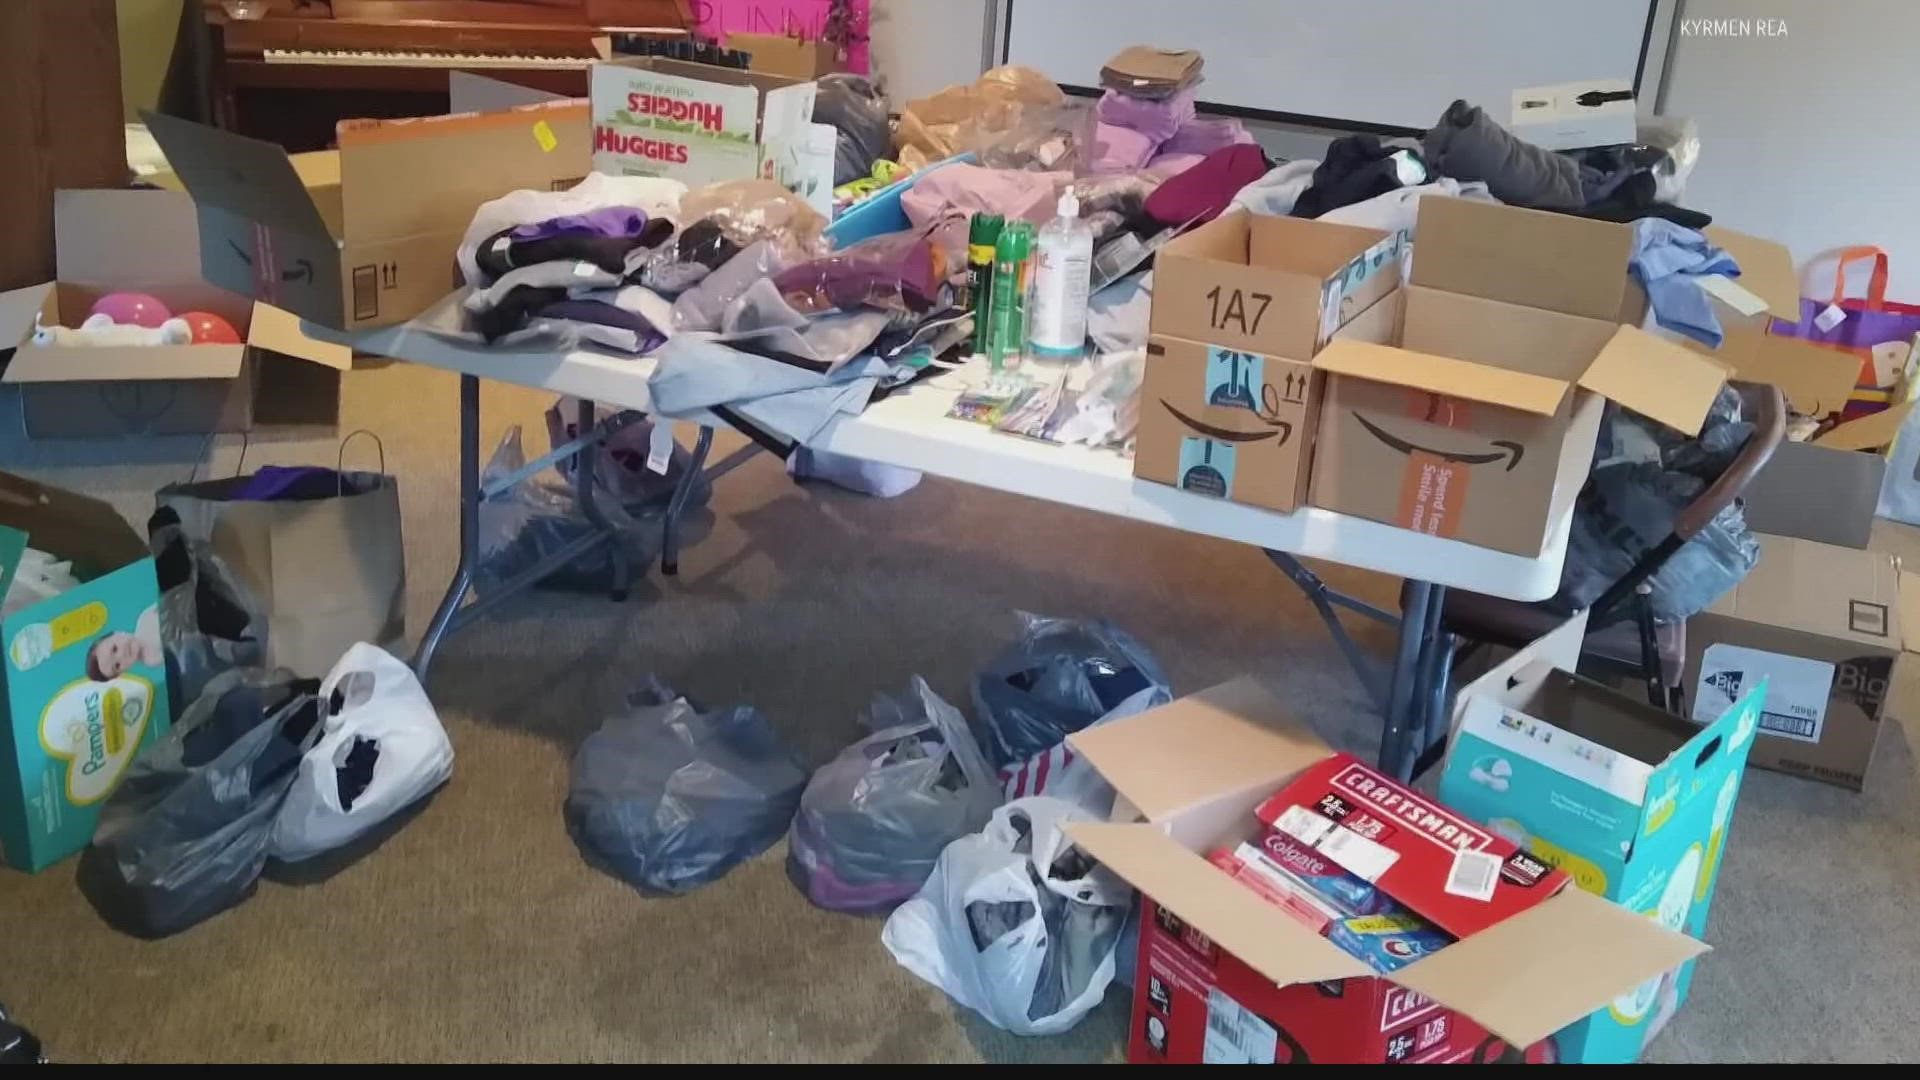 Several communities and churches in Johnson County have been collecting donations for the hundreds of Afghan evacuees currently living at Camp Atterbury.